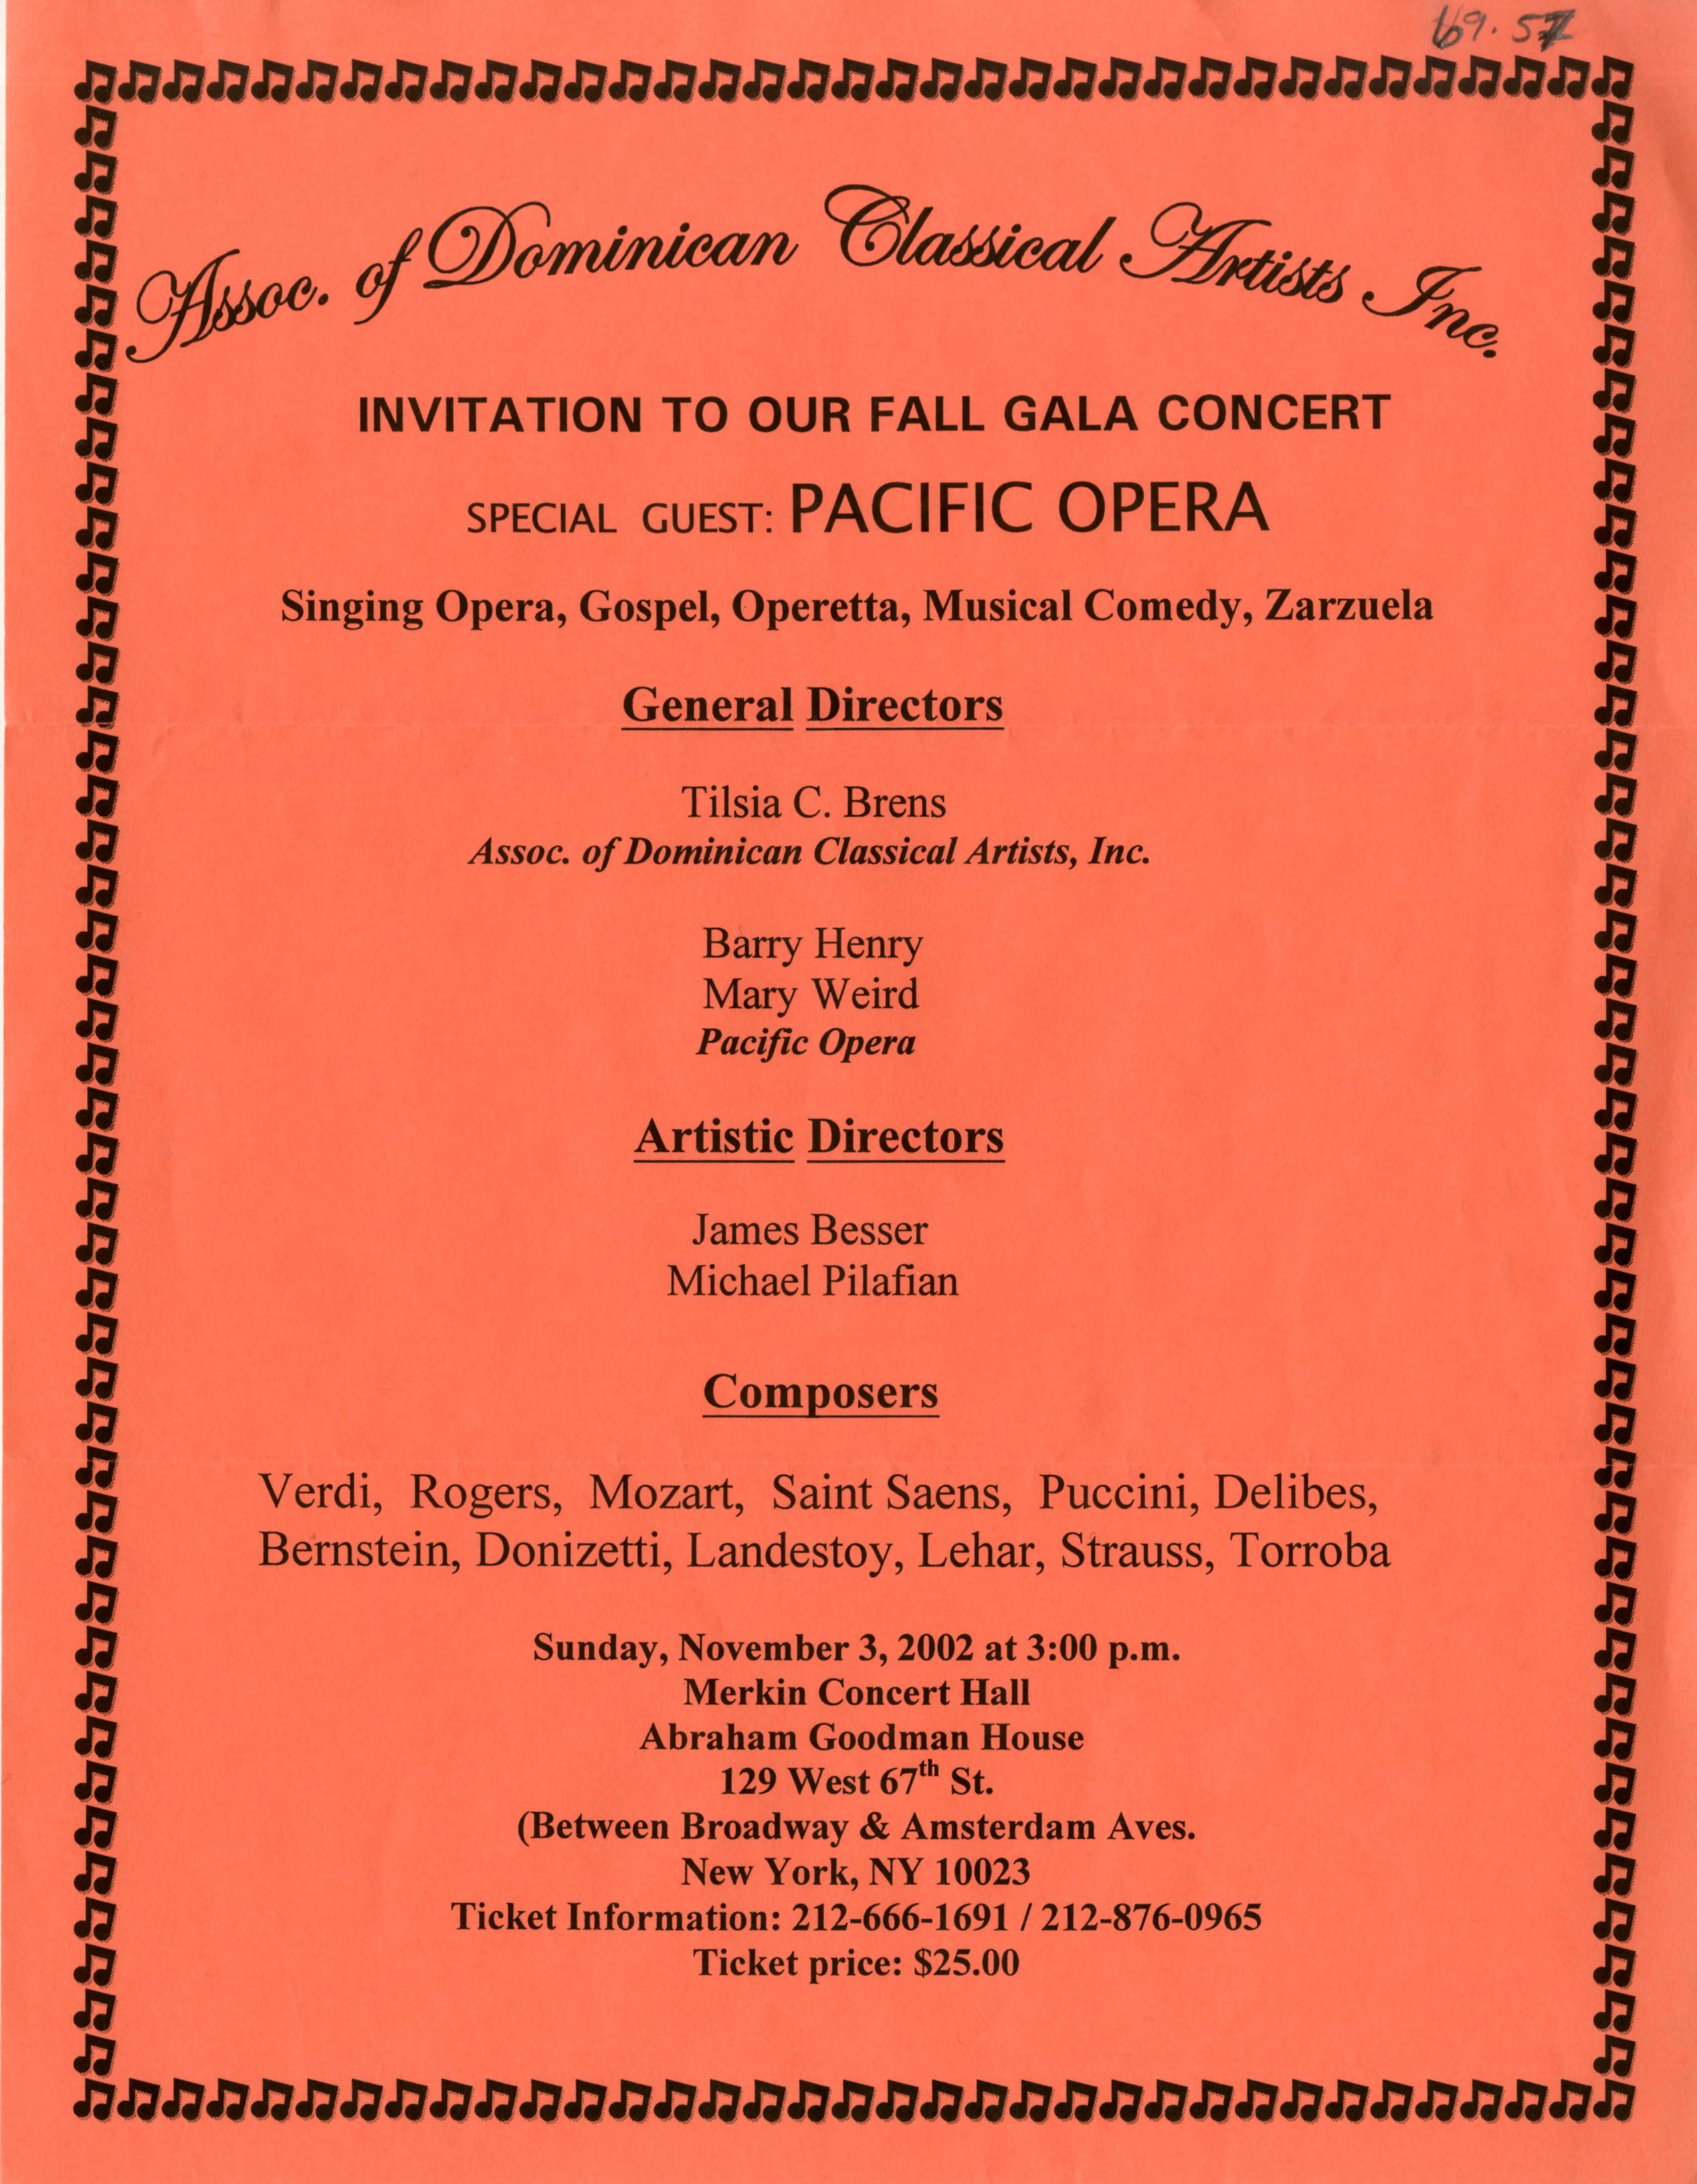 Invitation to Fall Gala Concert organized by the Association of Dominican Classical Artists, Inc. at Merkin Concert Hall, New York, November 3, 2002